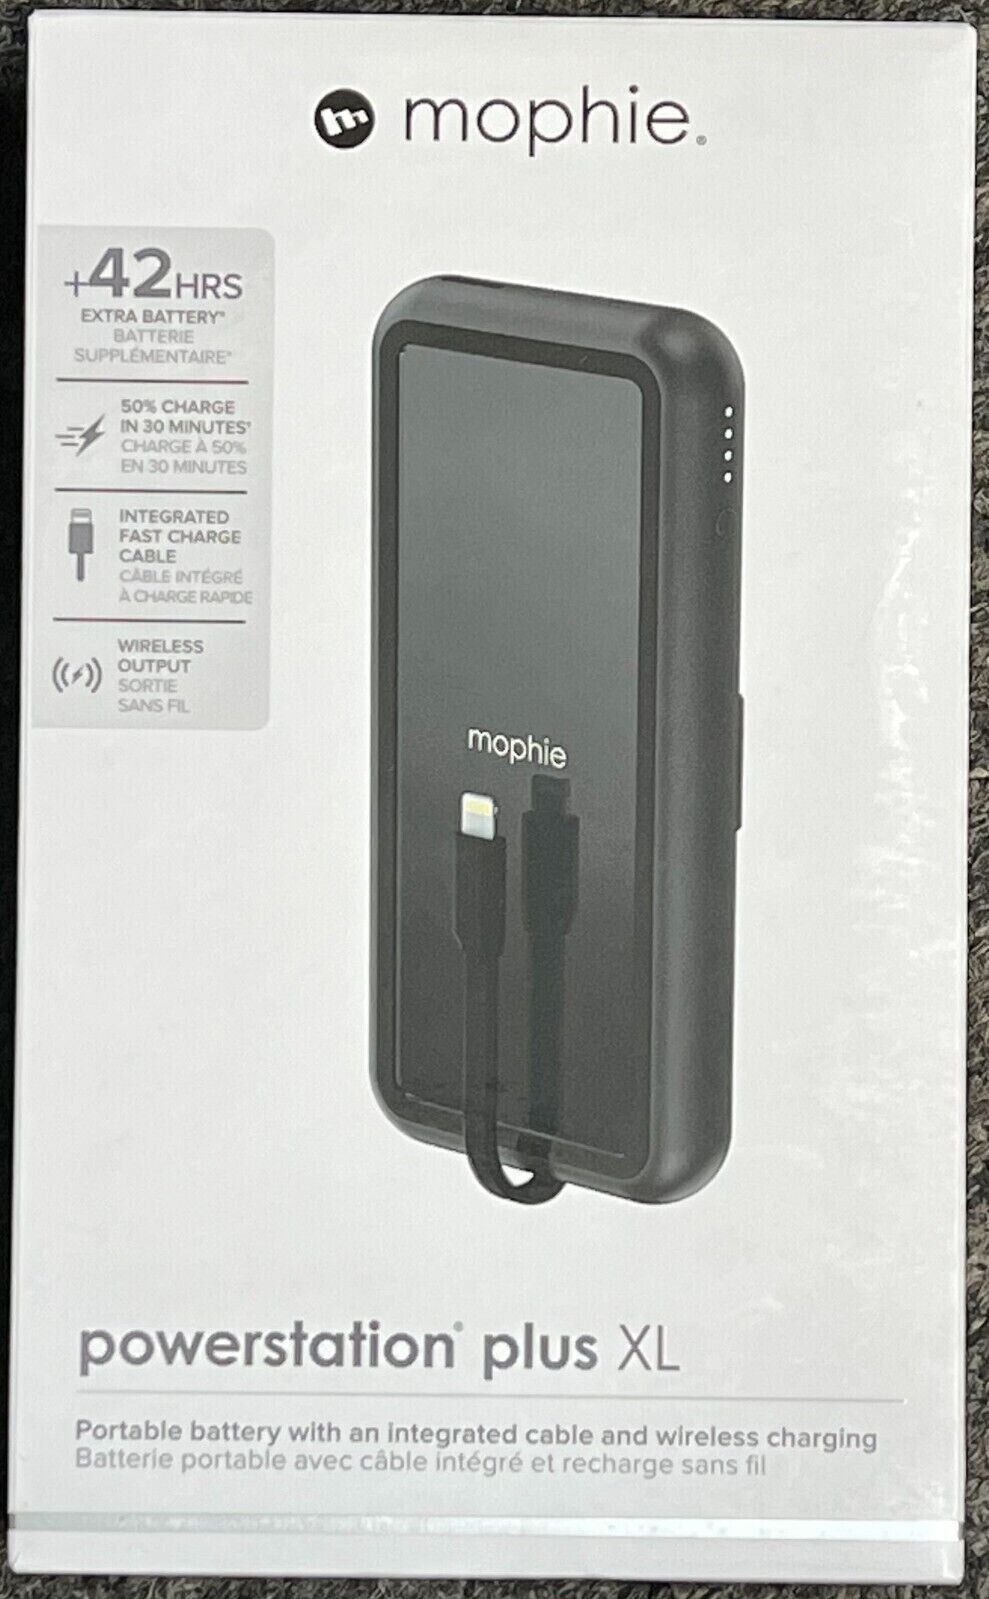 New Mophie Powerstation Plus XL Portable Battery & Wireless Charger 8K - Black